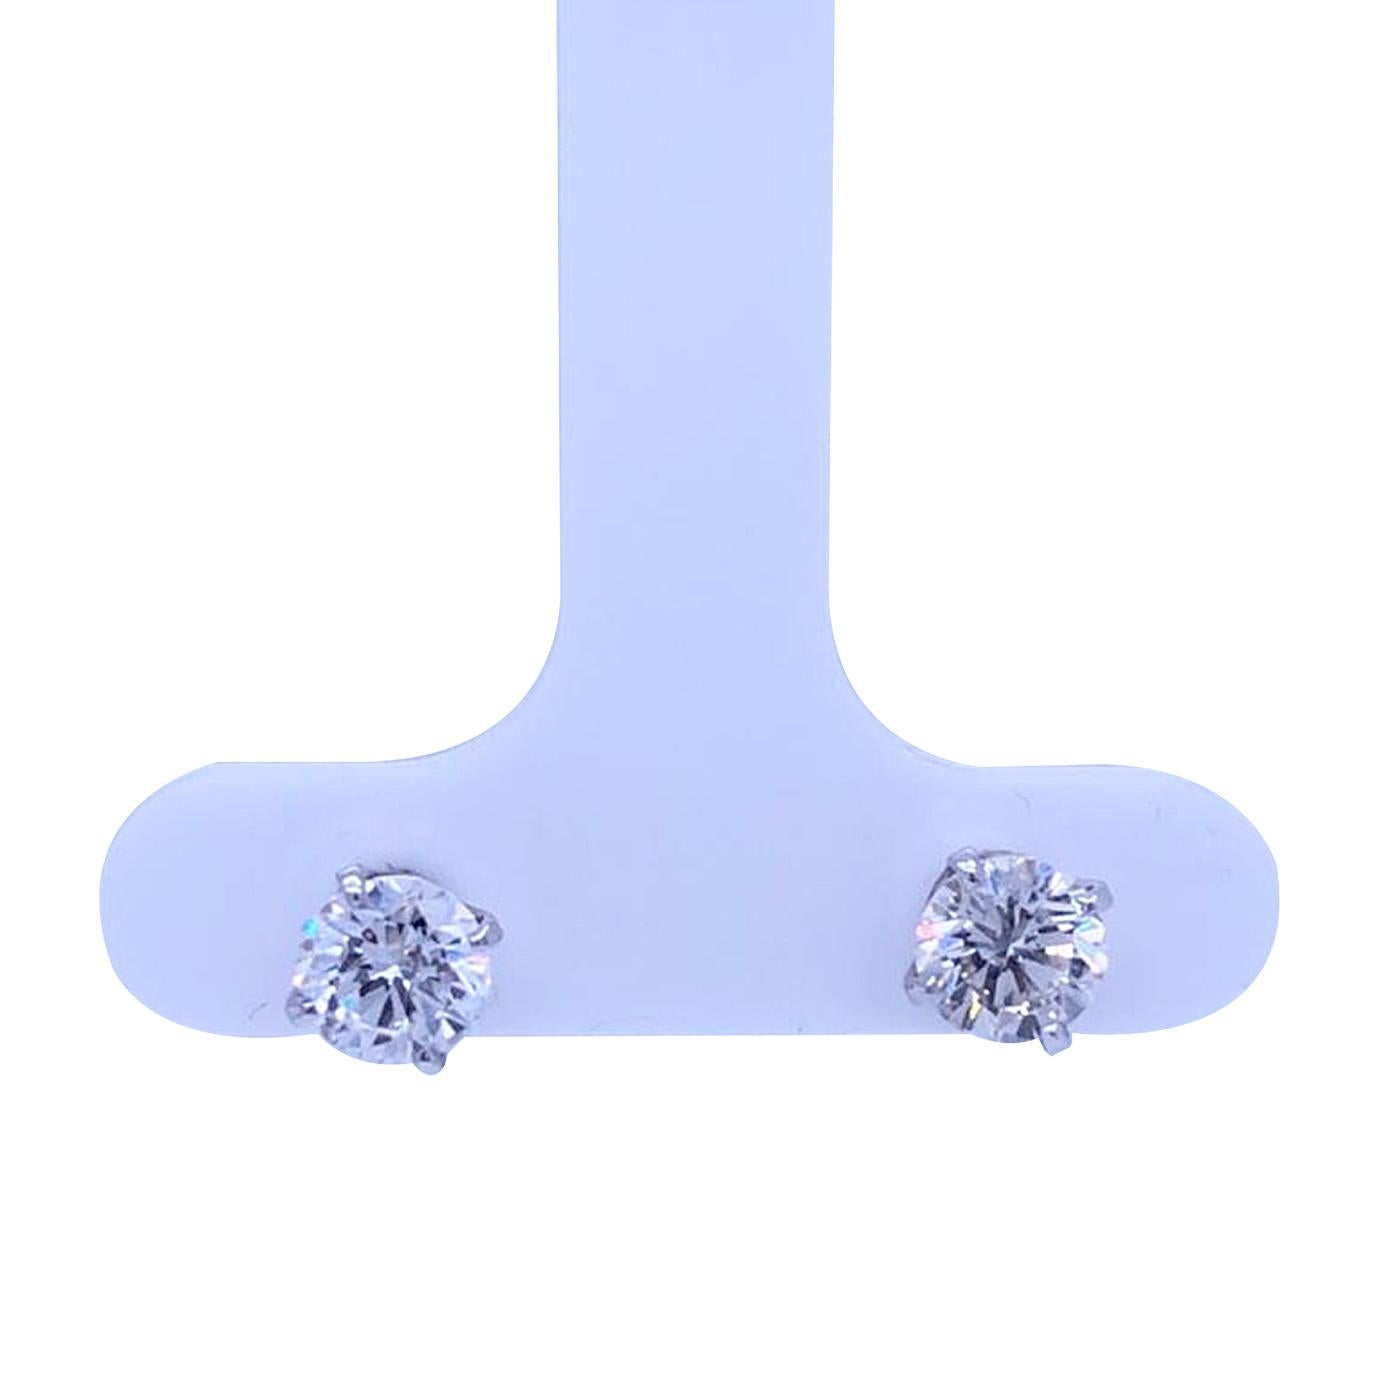 These four-prong basket diamond earrings are designed in 14kt white gold. Gorgeously featured in these exquisite earrings are 2 very good cuts H-I SI2-SI3 round diamonds.
Sturdy diamonds set in prong setting form these fancy diamond stud